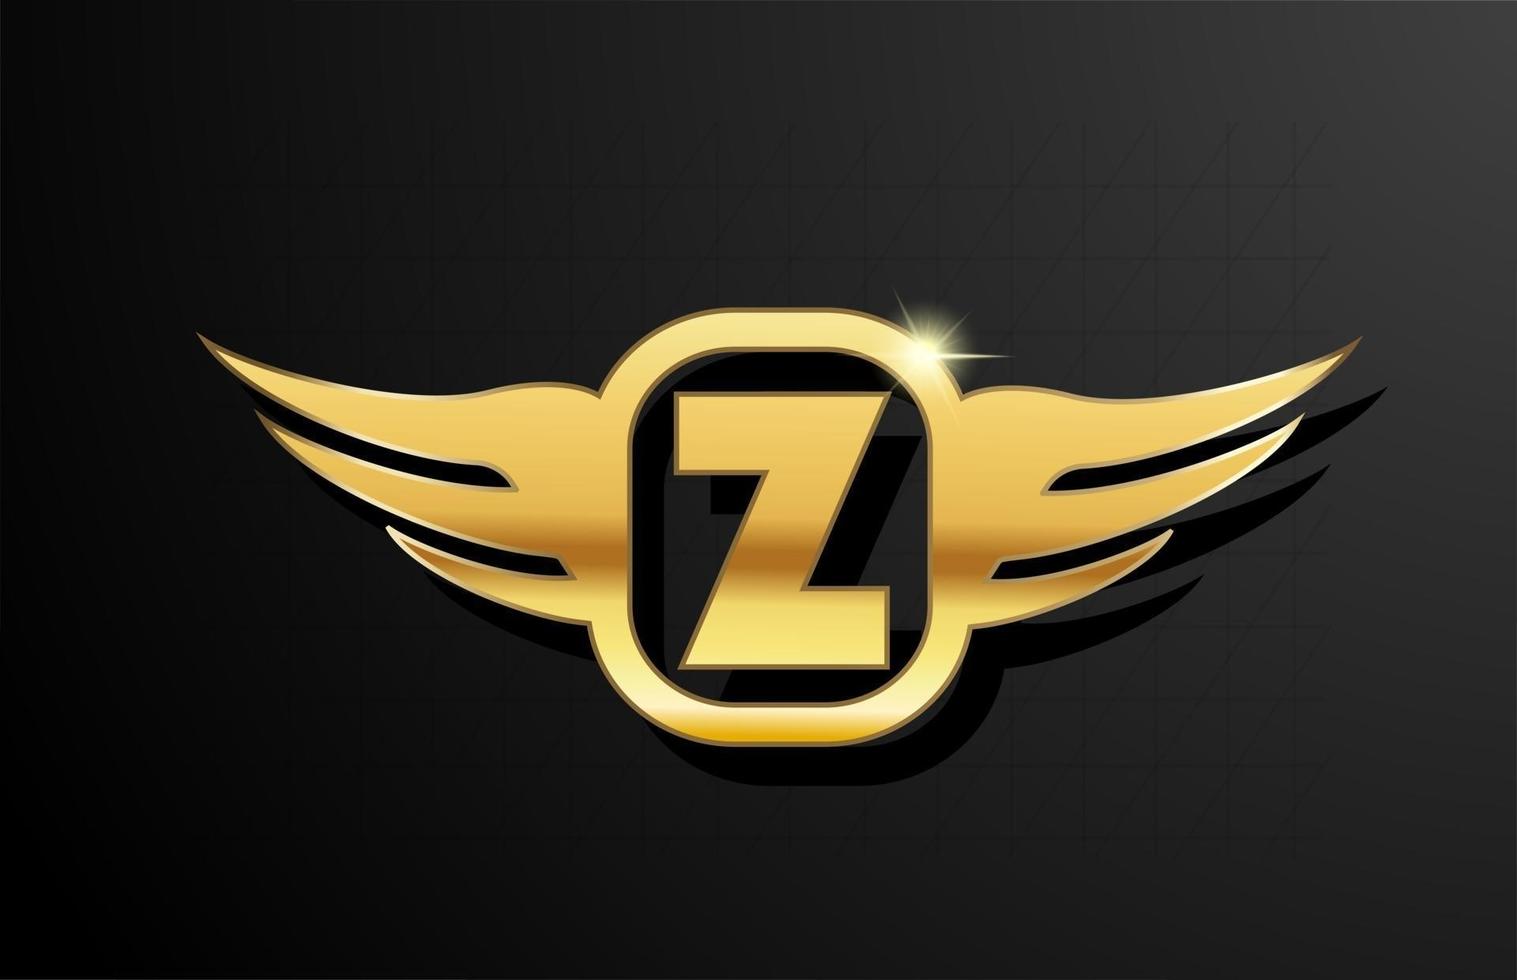 Z gold letter logo alphabet for business and company with yellow color. Corporate brading and lettering with golden metal design and wing vector